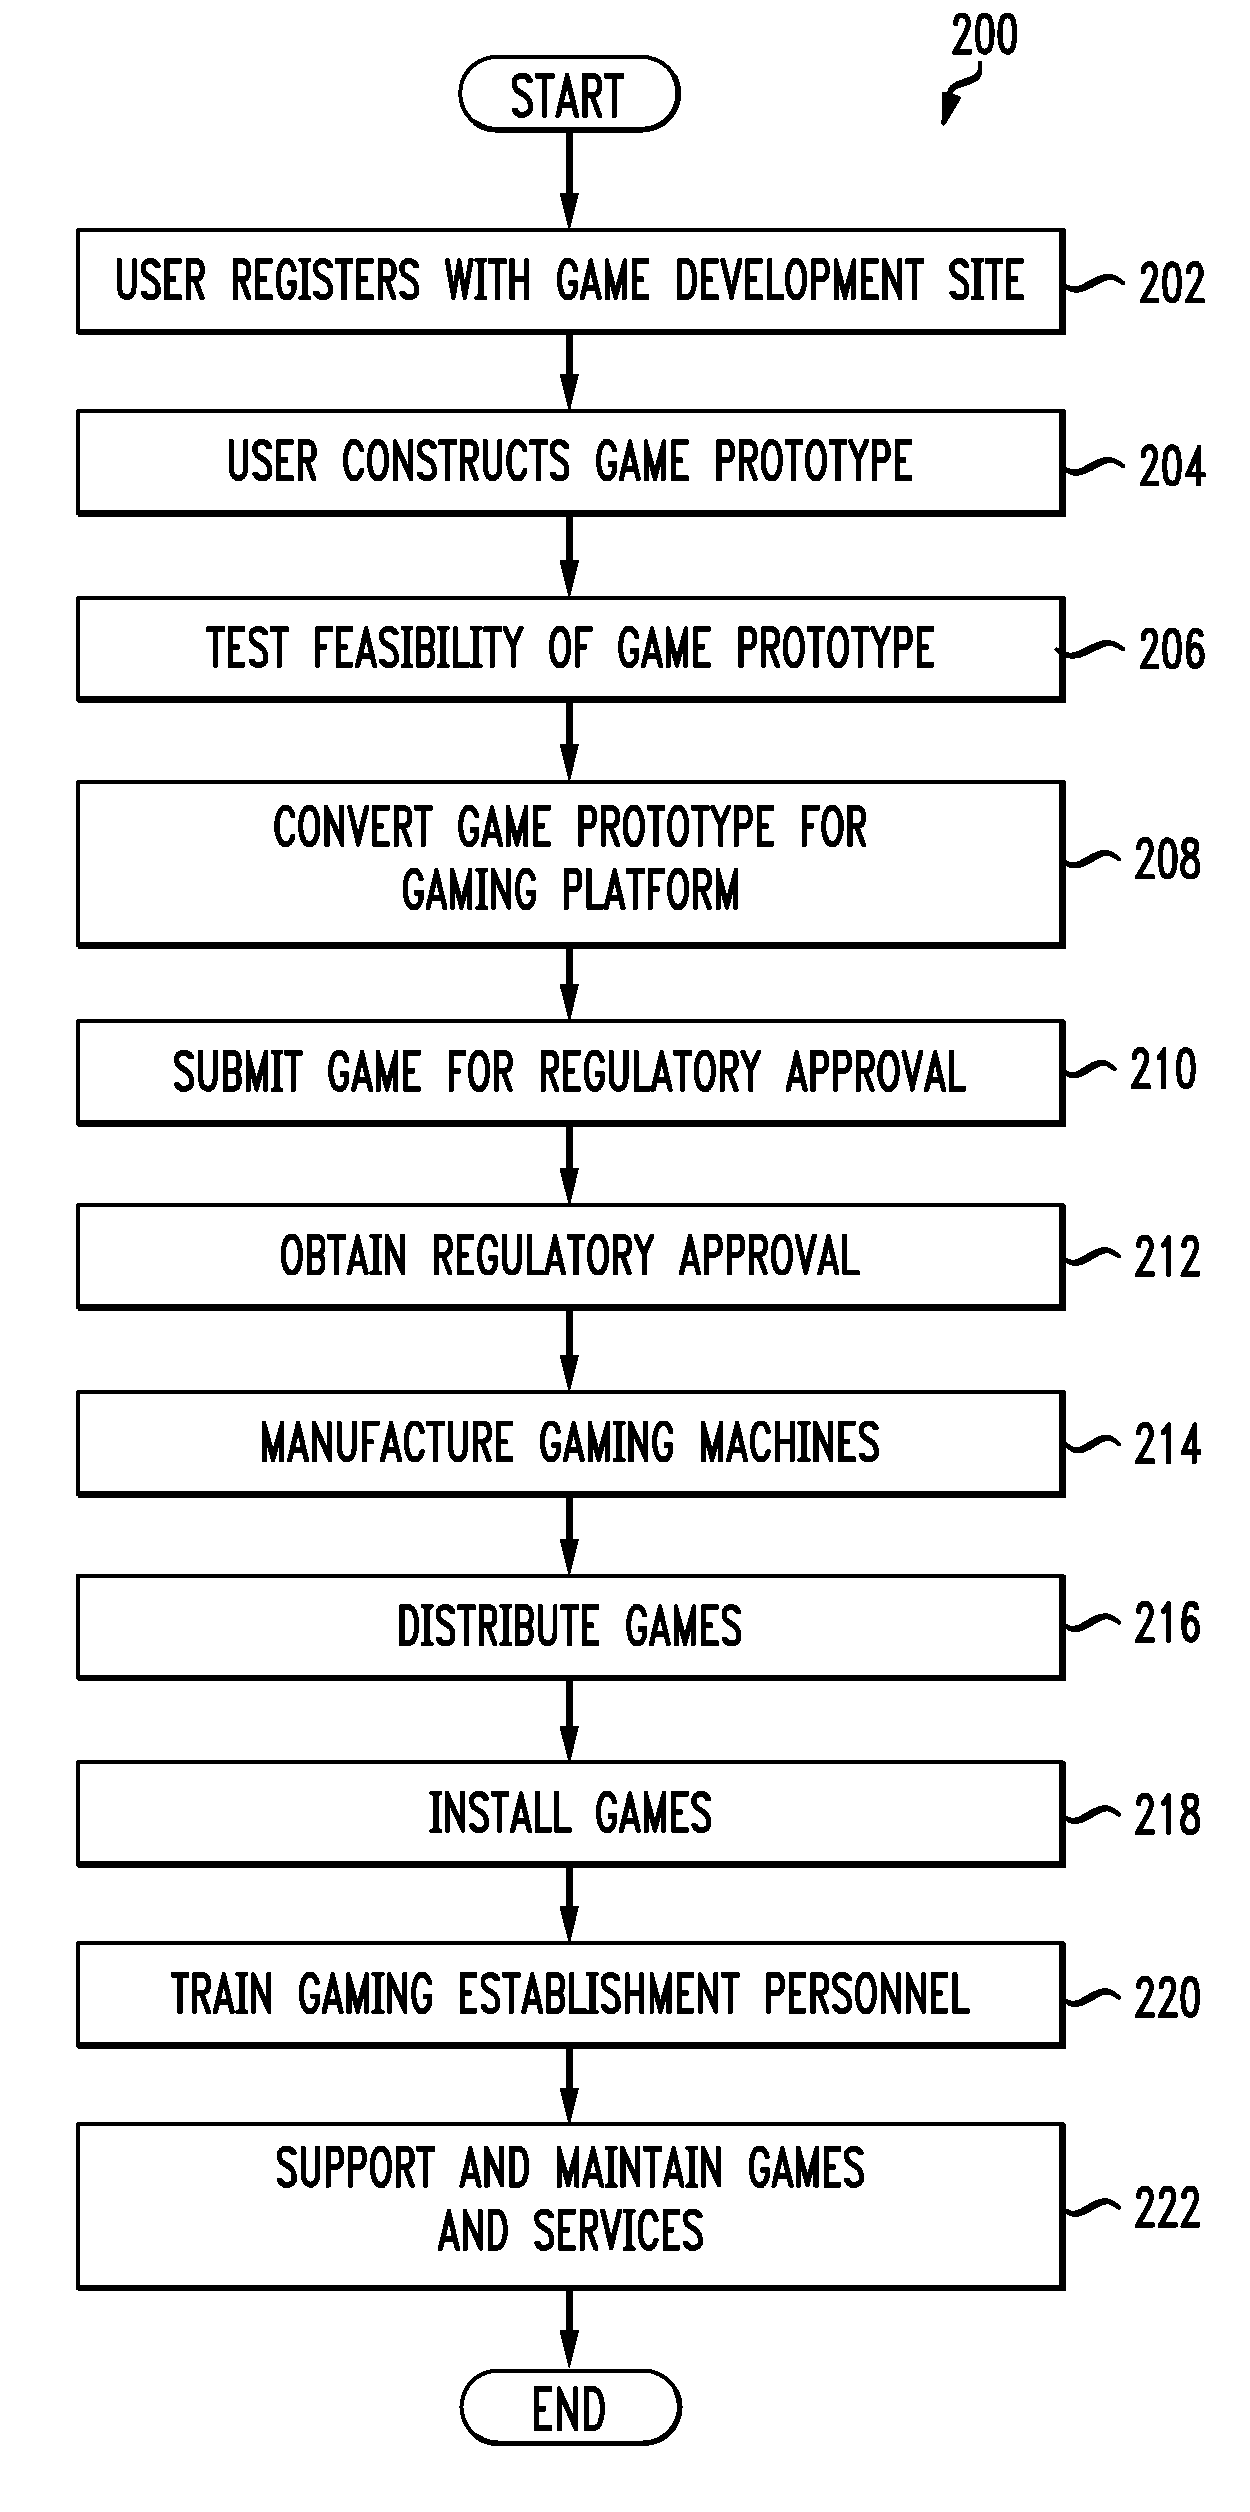 Game production and regulatory approval systems